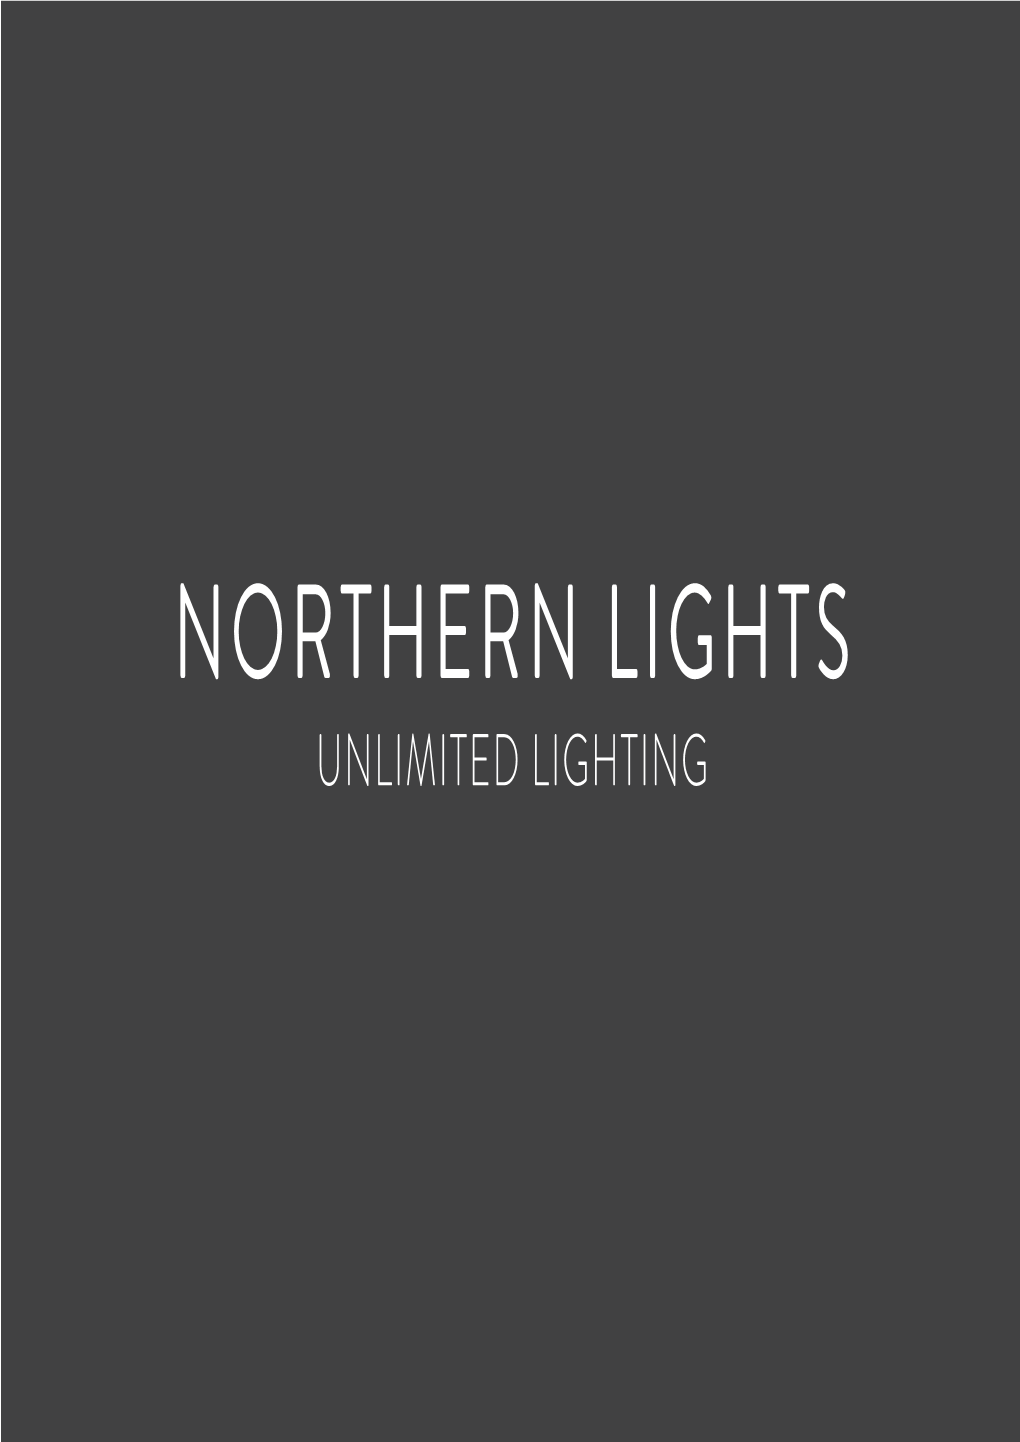 NORTHERN LIGHTS UNLIMITED LIGHTING Project Foler 5 Intros - PART 1 - Copy Layout 1 02/11/2015 09:42 Page 1